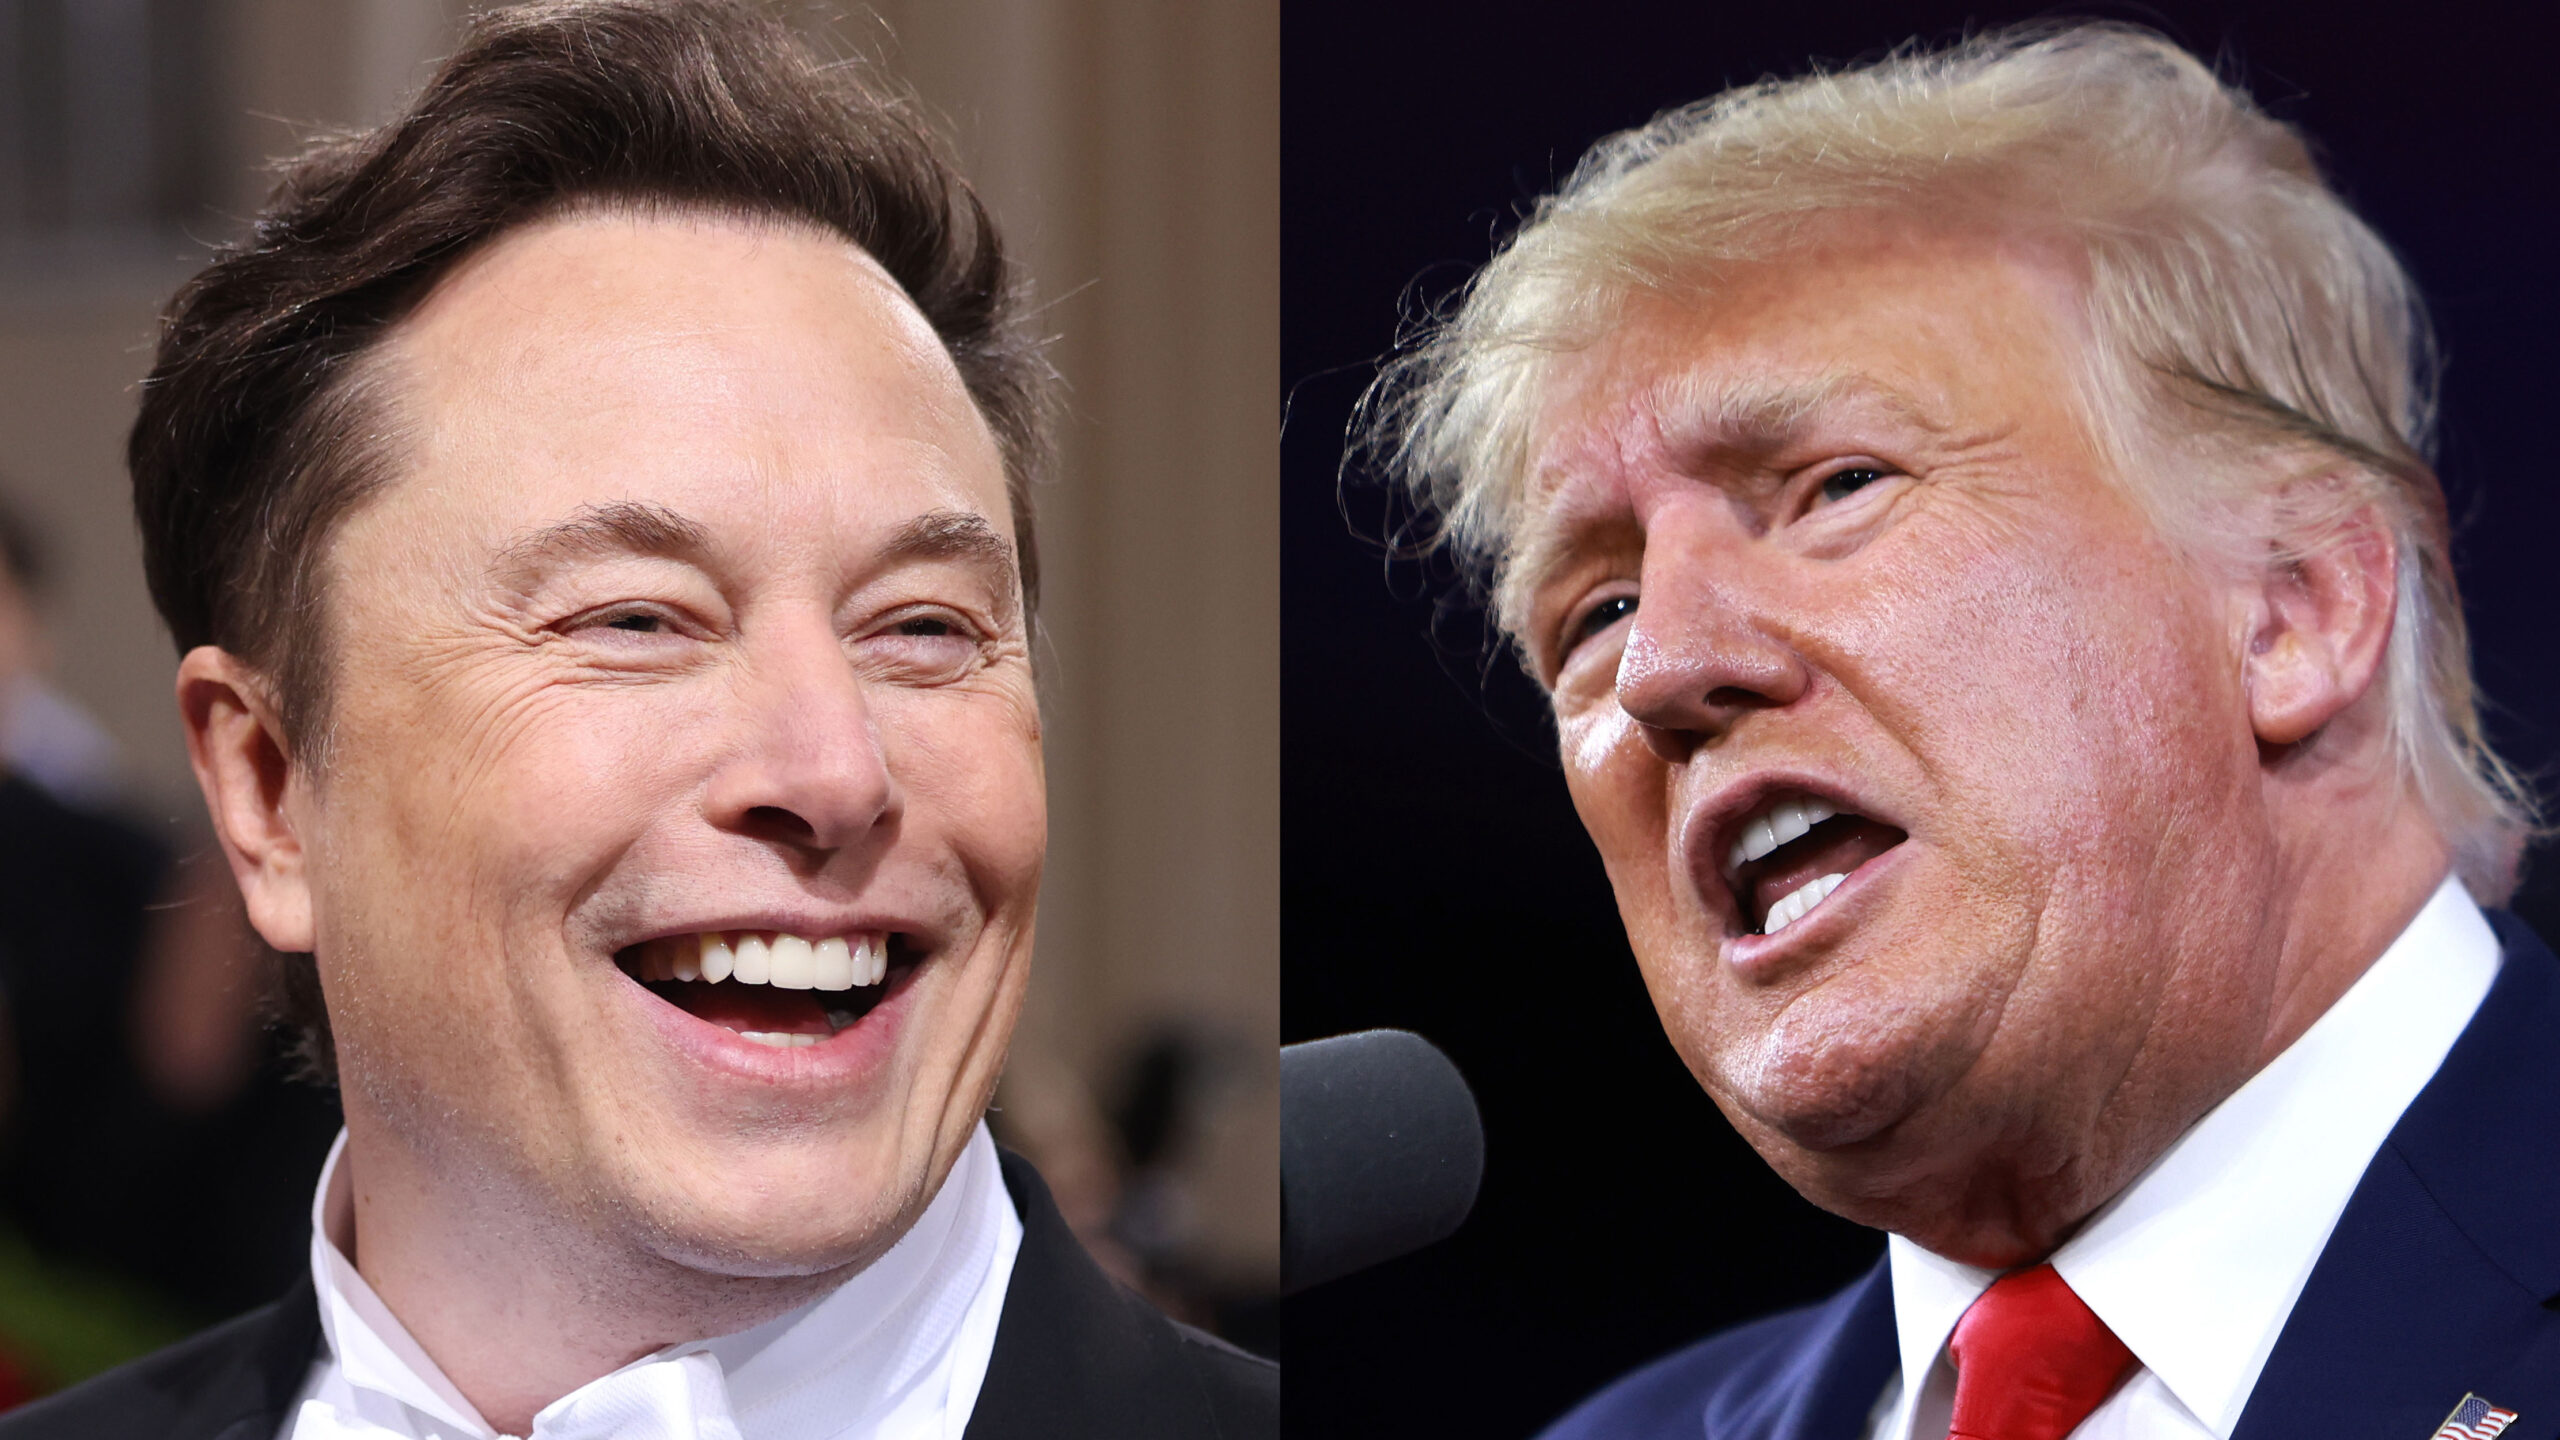 Elon Musk Predicts Trump Wins ‘In A Landslide Victory’ If Arrested